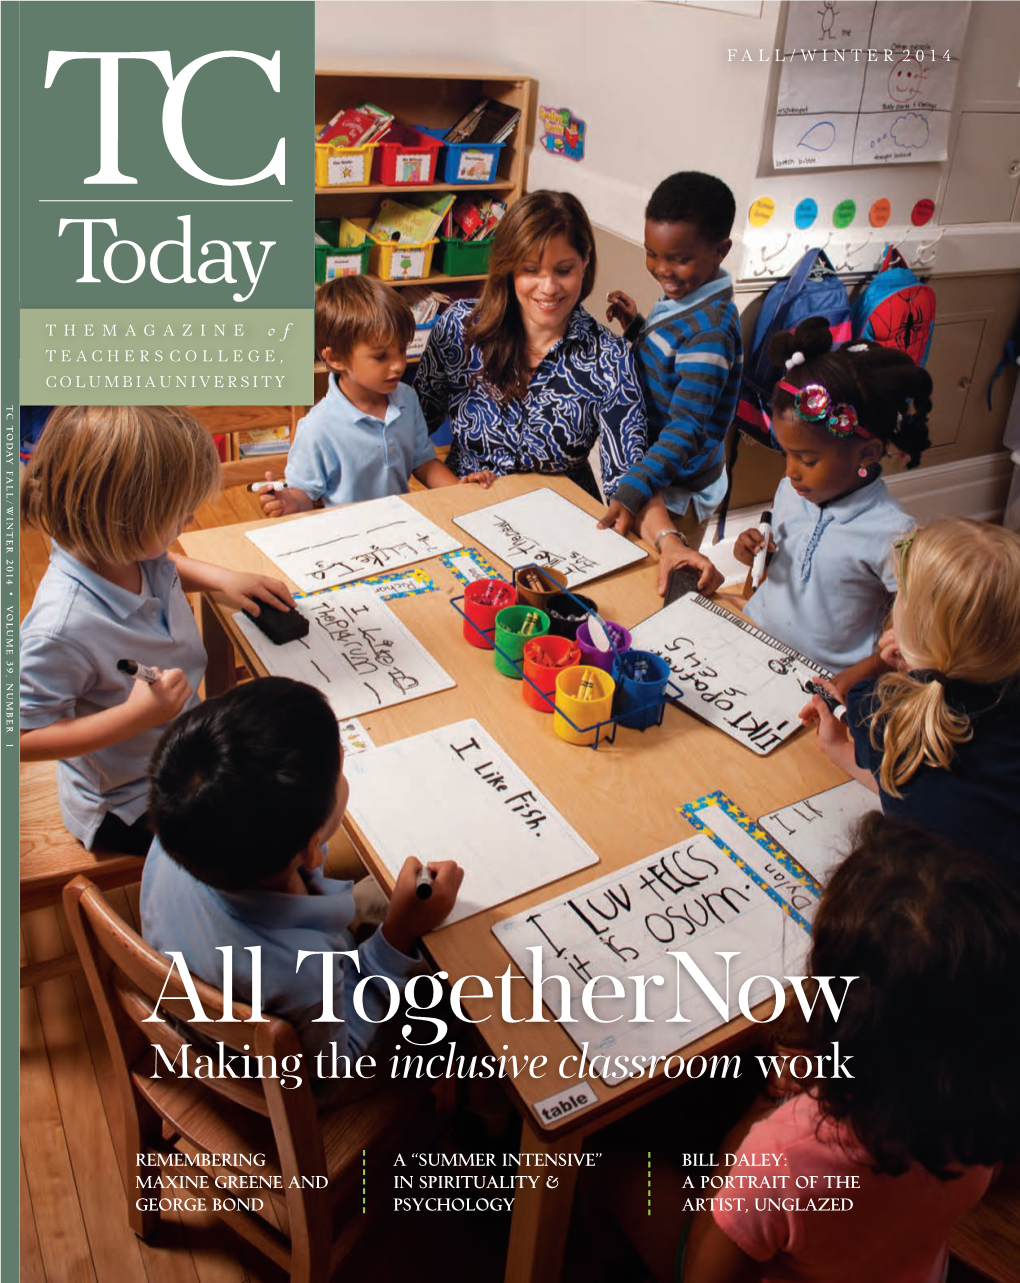 All Togethernow Making the Inclusive Classroom Work